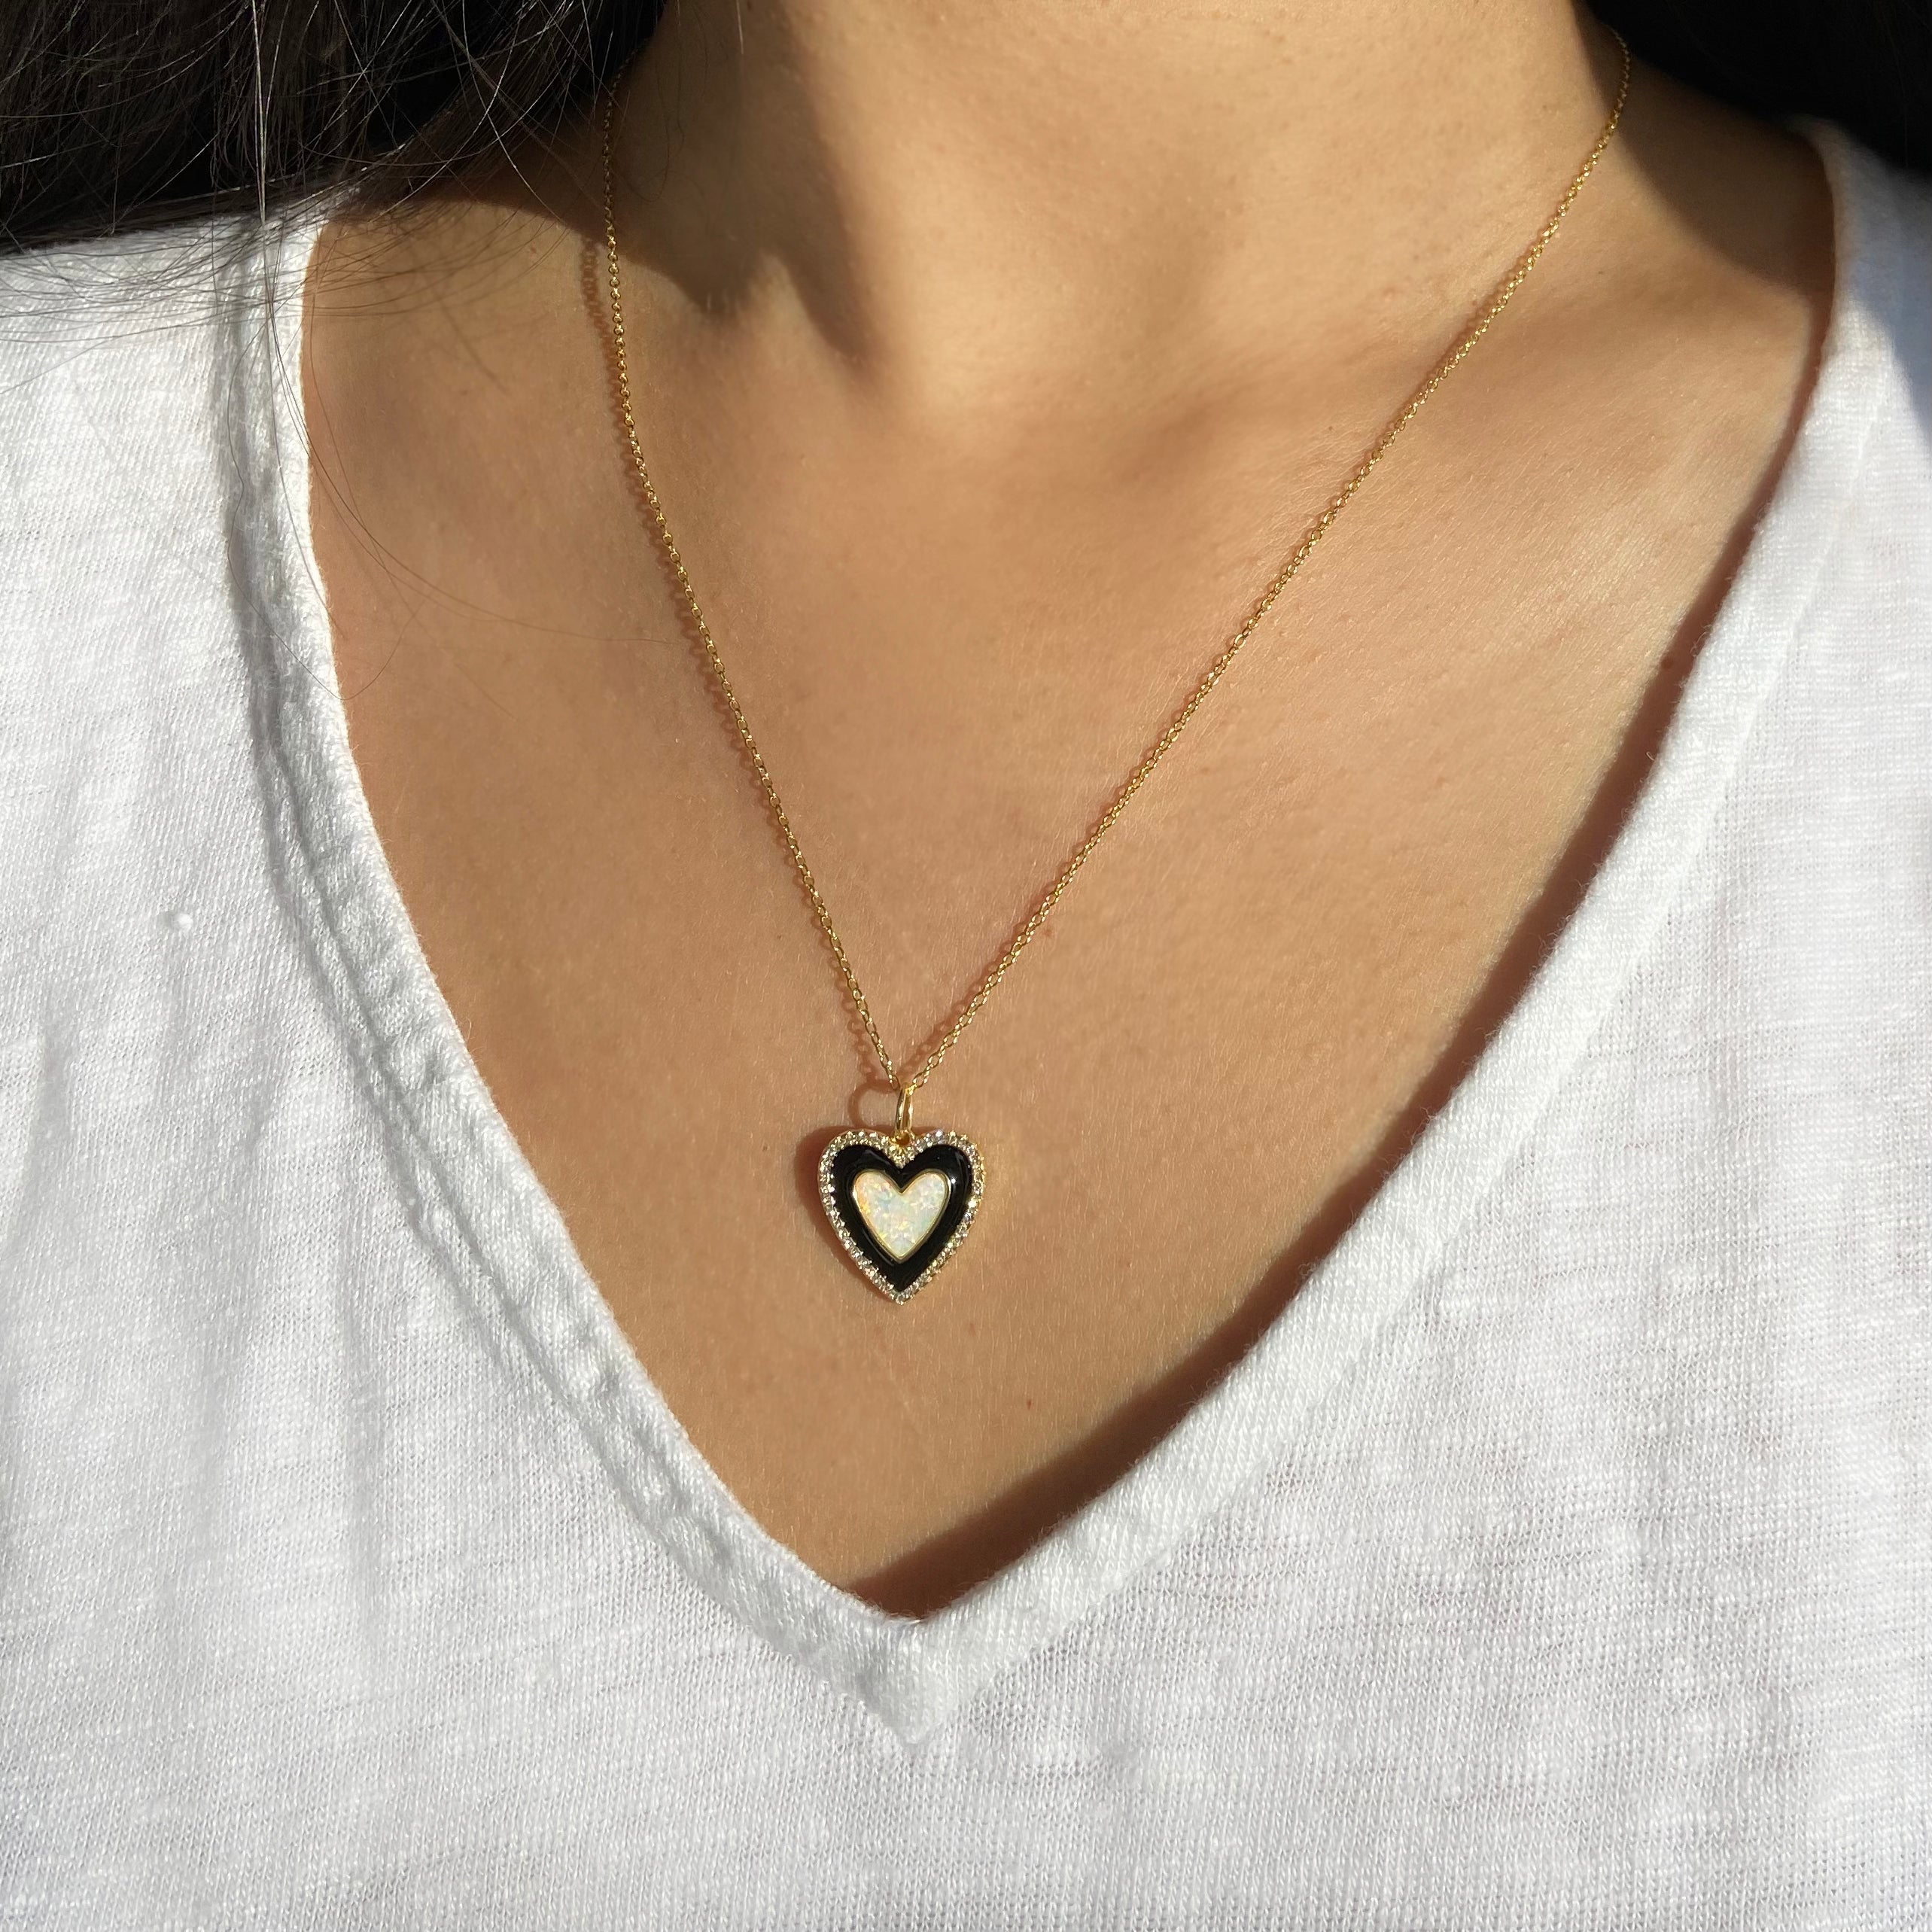 Double Layer Two Tone Heart Nameplate Personalized Custom Name Necklace  Gold Plated Jewelry Gift For Women Girl | Custom name necklace, Jewelry  gifts, Gifts for women